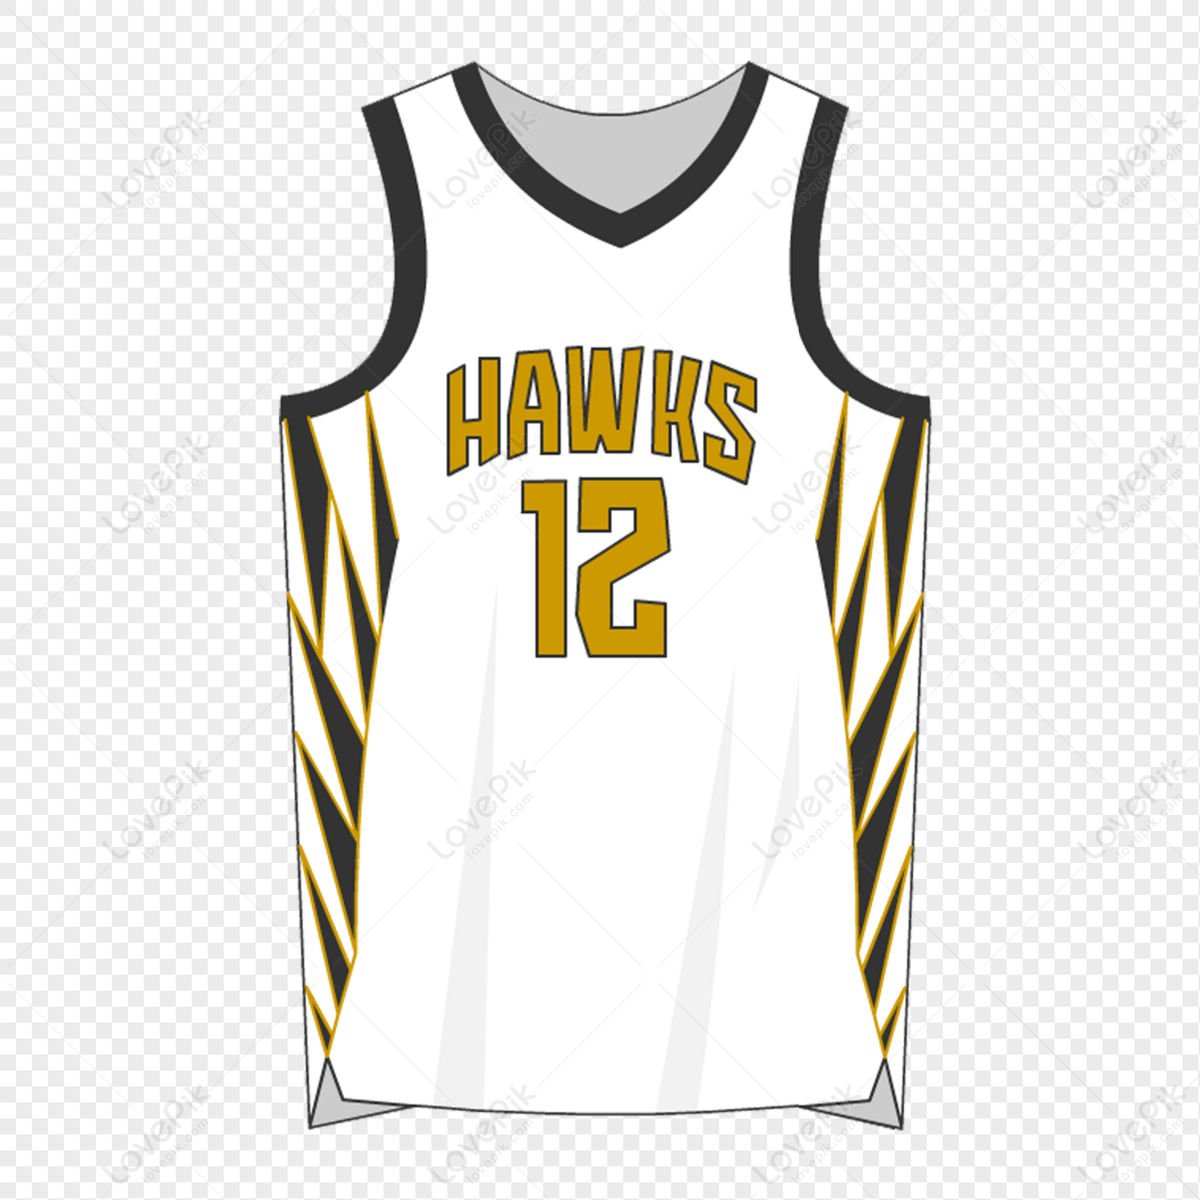 Jersey PNG Images Transparent Free Download